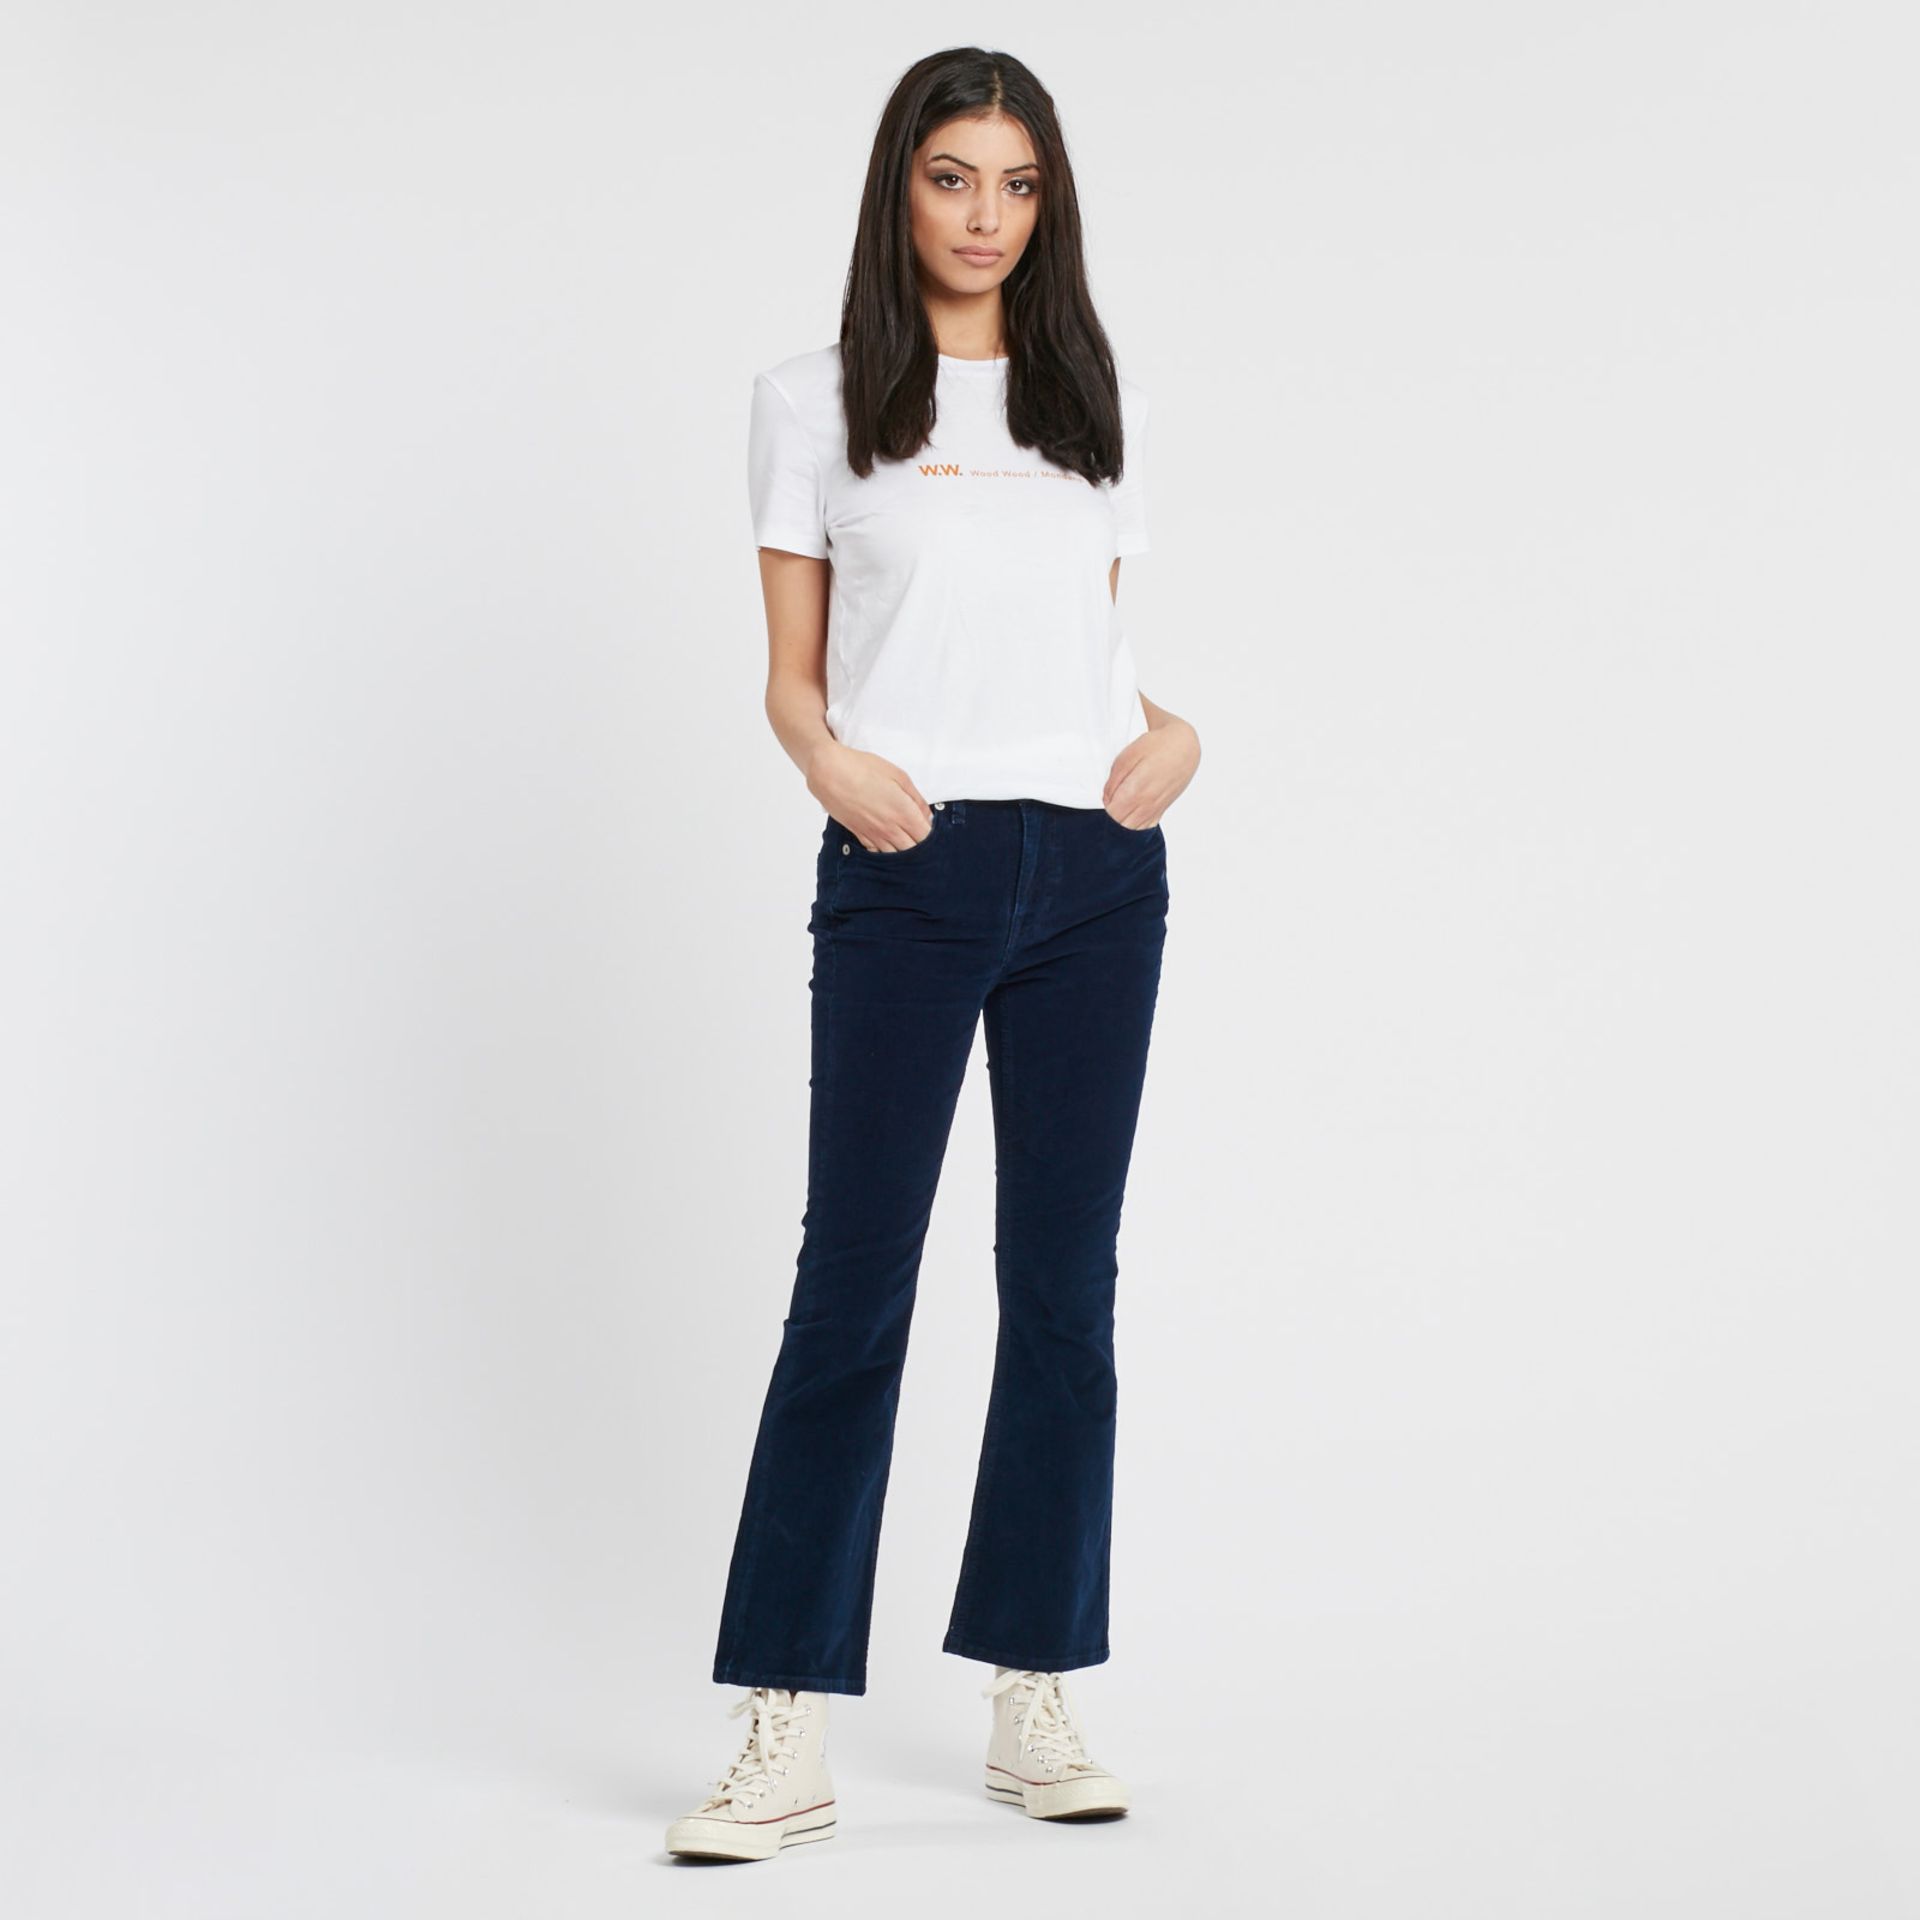 The Cords & Co. "Elin" Style, Women's/ 5-Pocket/ Mid-Waist/ Straight Fit/ Cropped Leg Pants